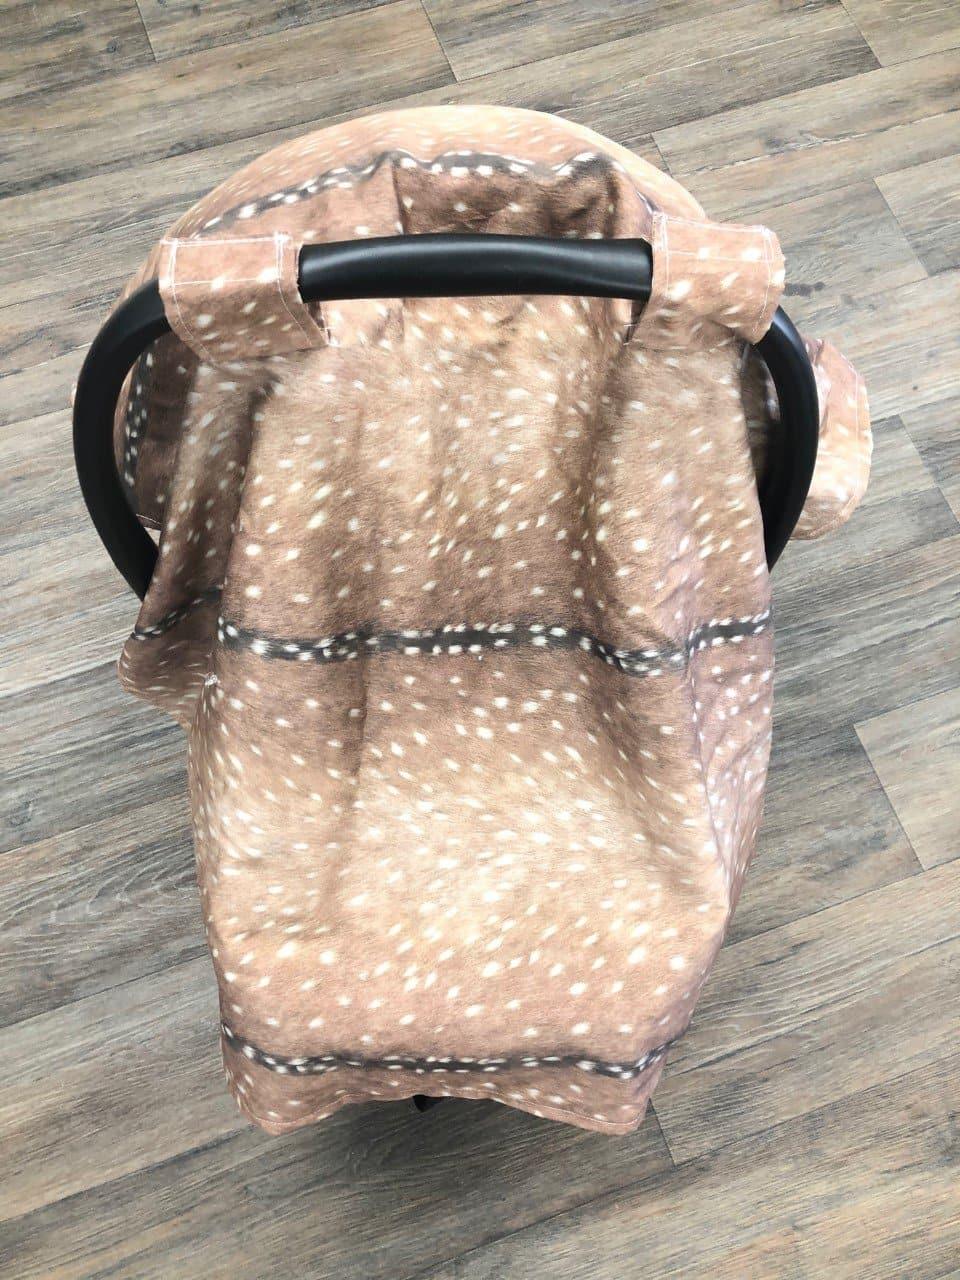 Custom Carseat Tent - Deer Skin Cotton Carseat Canopy, Tent, Woodland - DBC Baby Bedding Co 